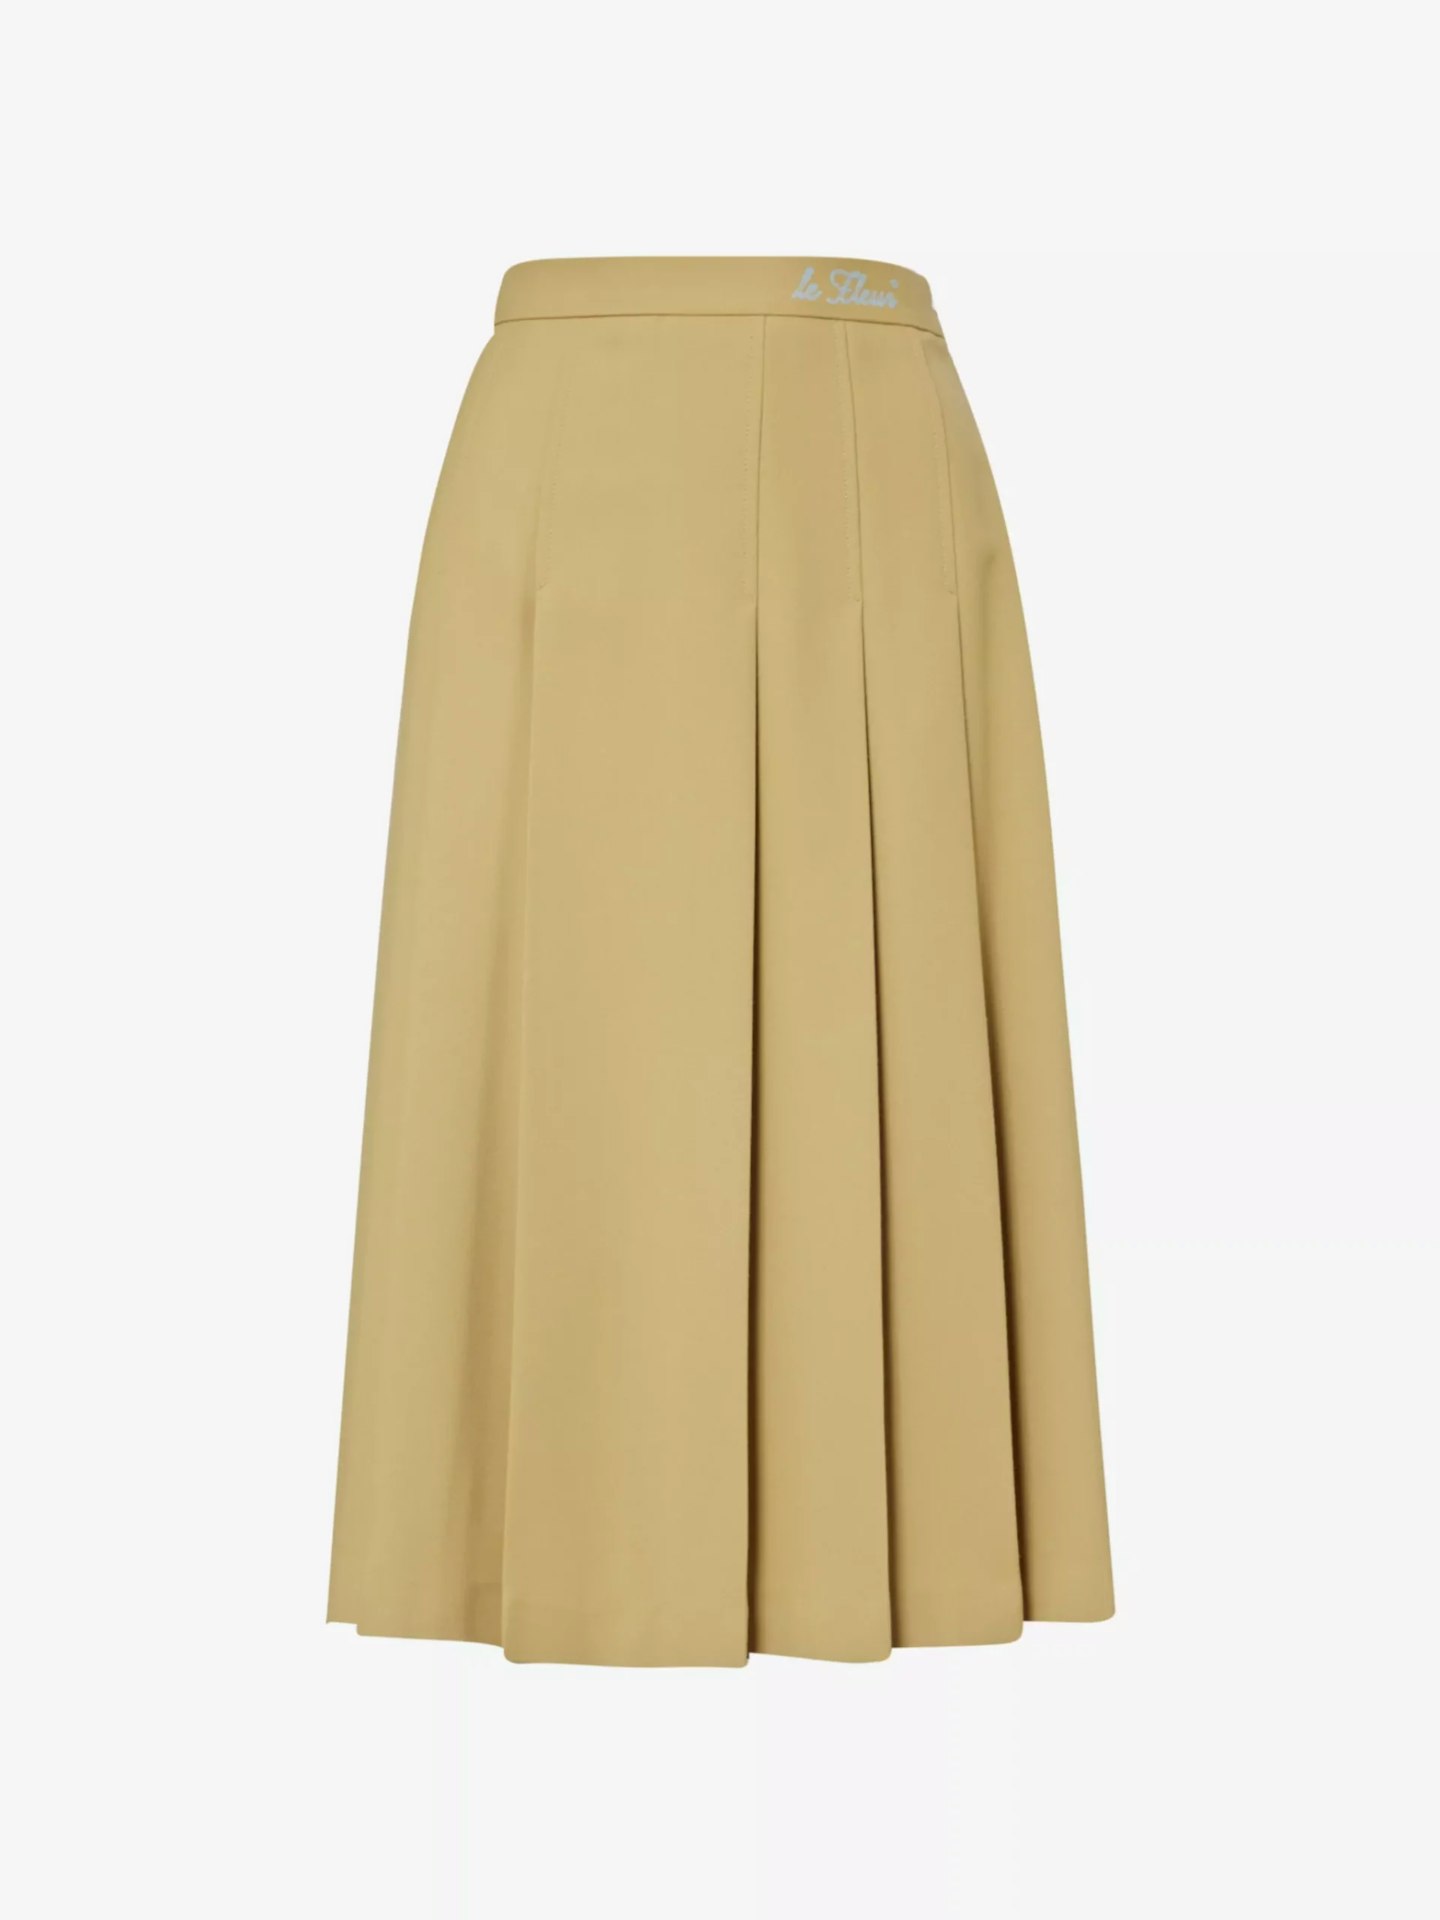 Lacoste x Le Fleur, Brand-Embroidered Pleated Woven Midi Skirt